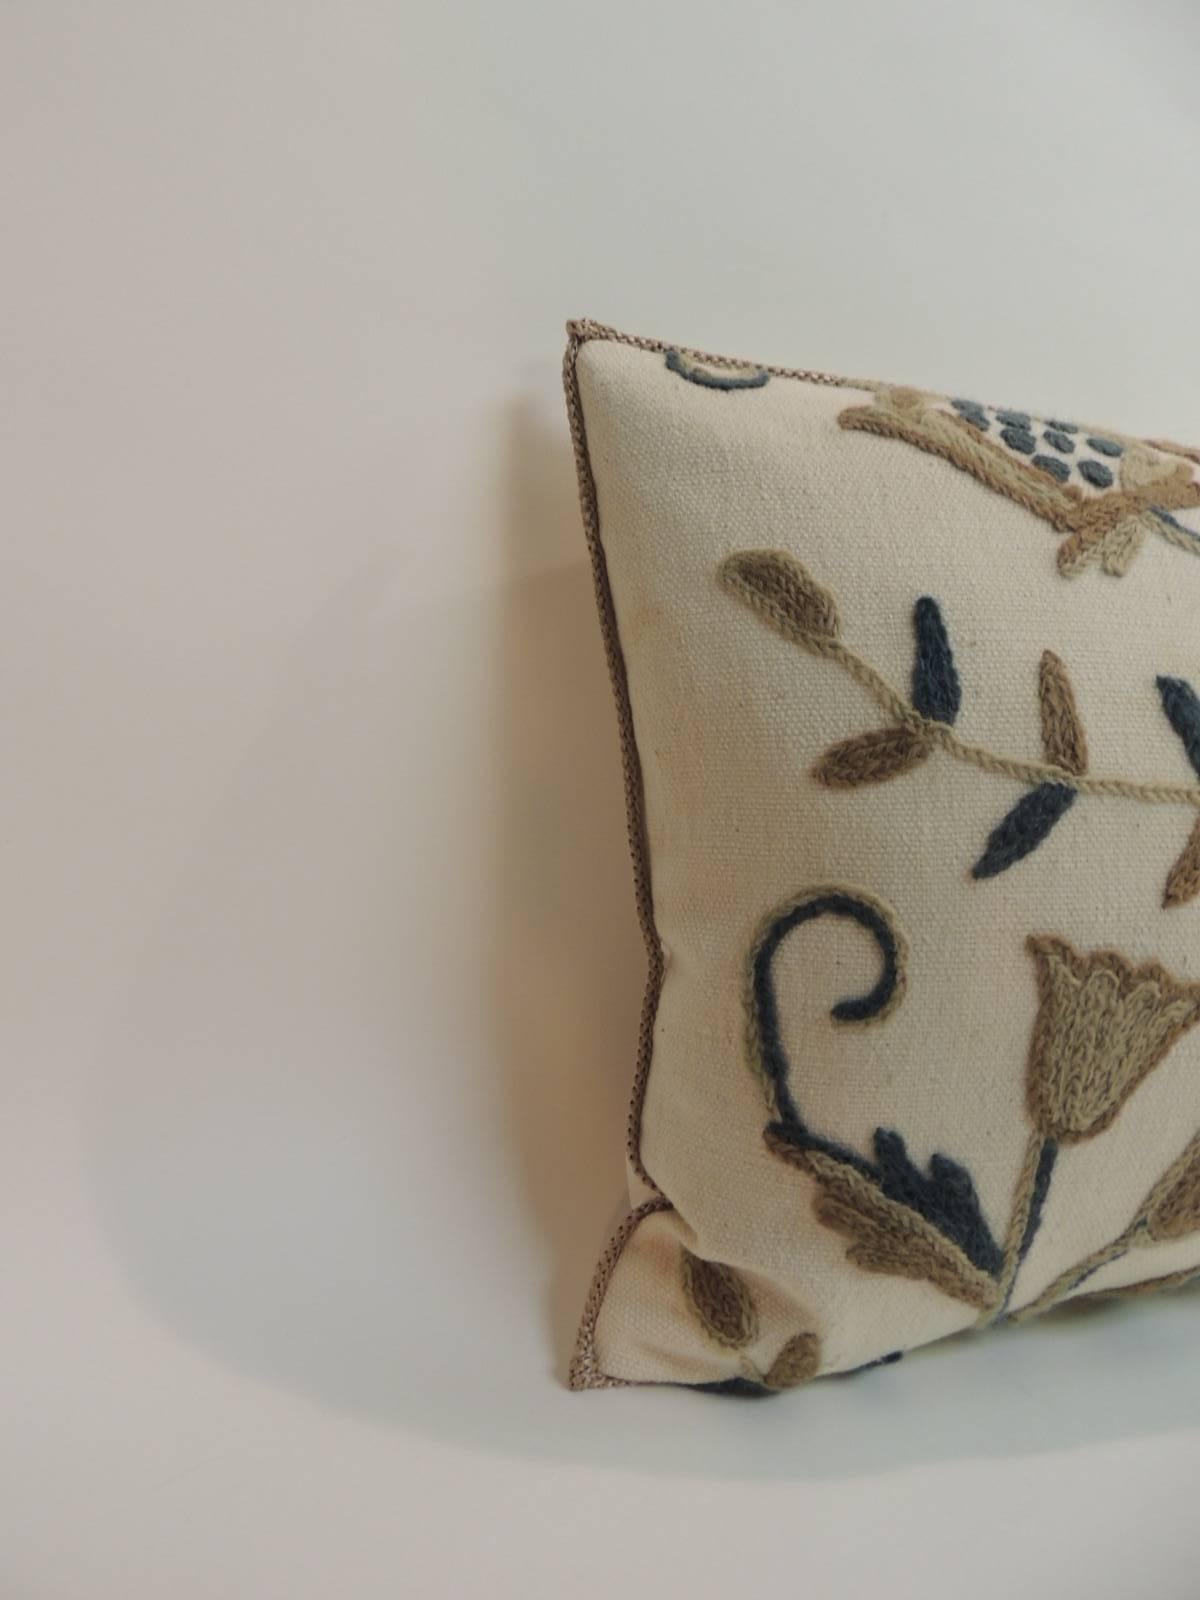 Floral pattern of wool embroidery on textured linen vintage decorative bolster pillow. Embellished with a taupe color rope trim. Decorative bolster finished with natural linen backing. In shades of camel, tan, slate blue and natural. handcrafted and